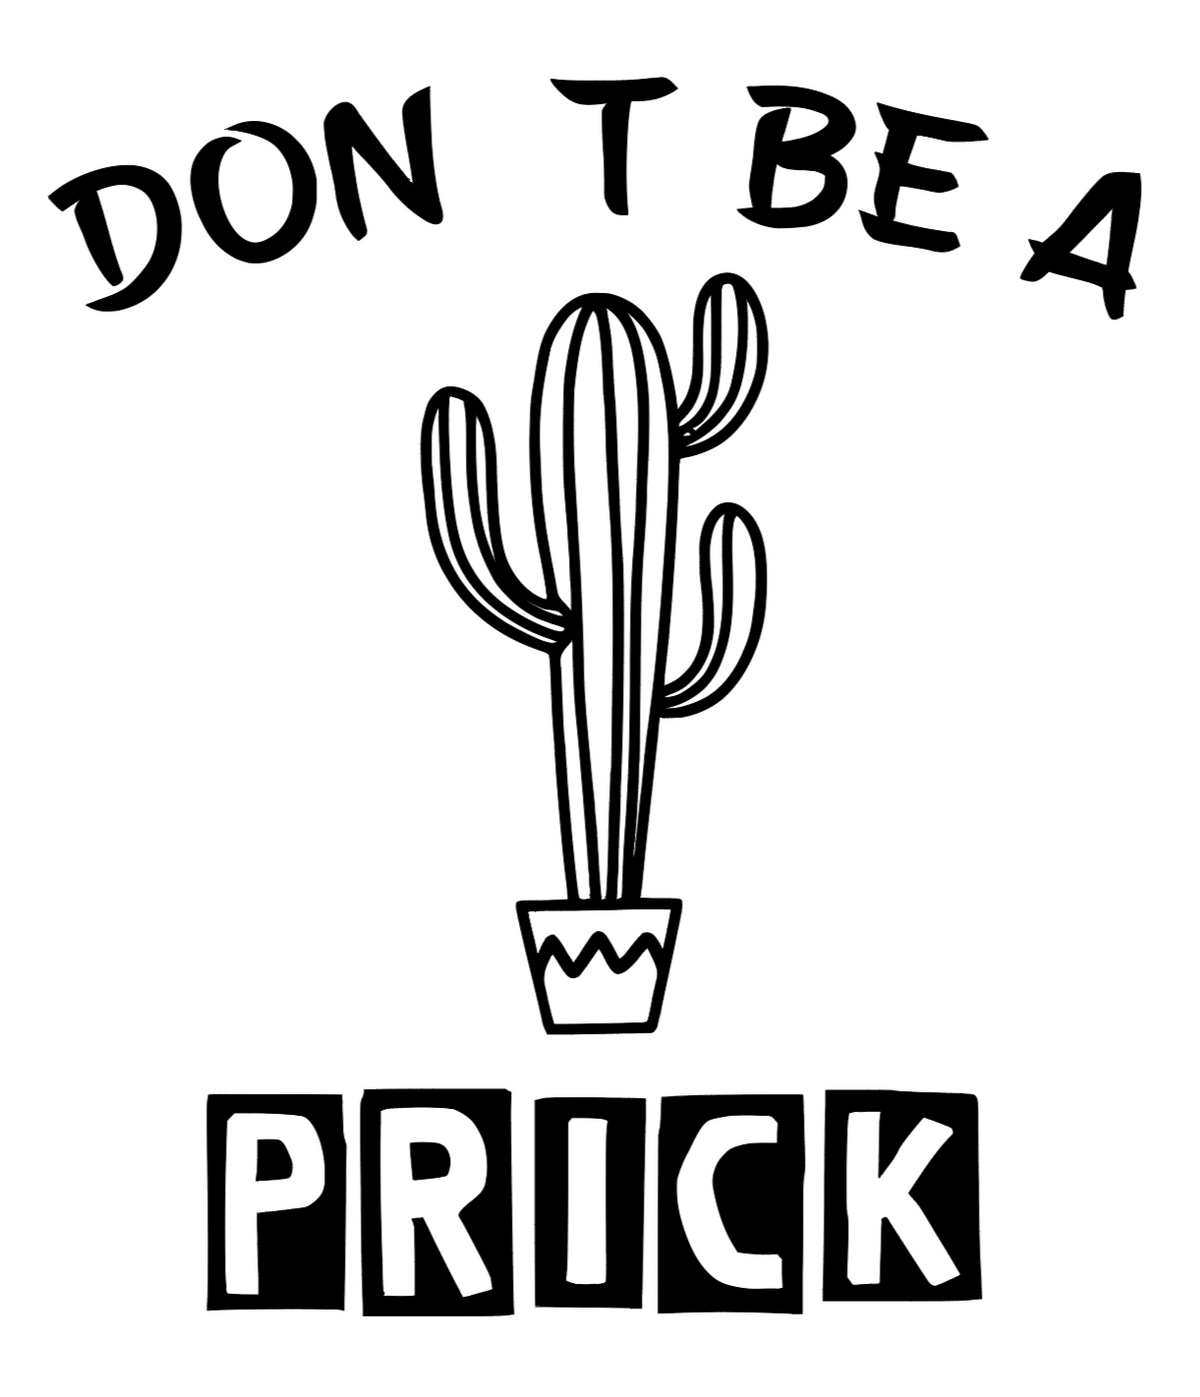 Don't Be a Prick t-shirt